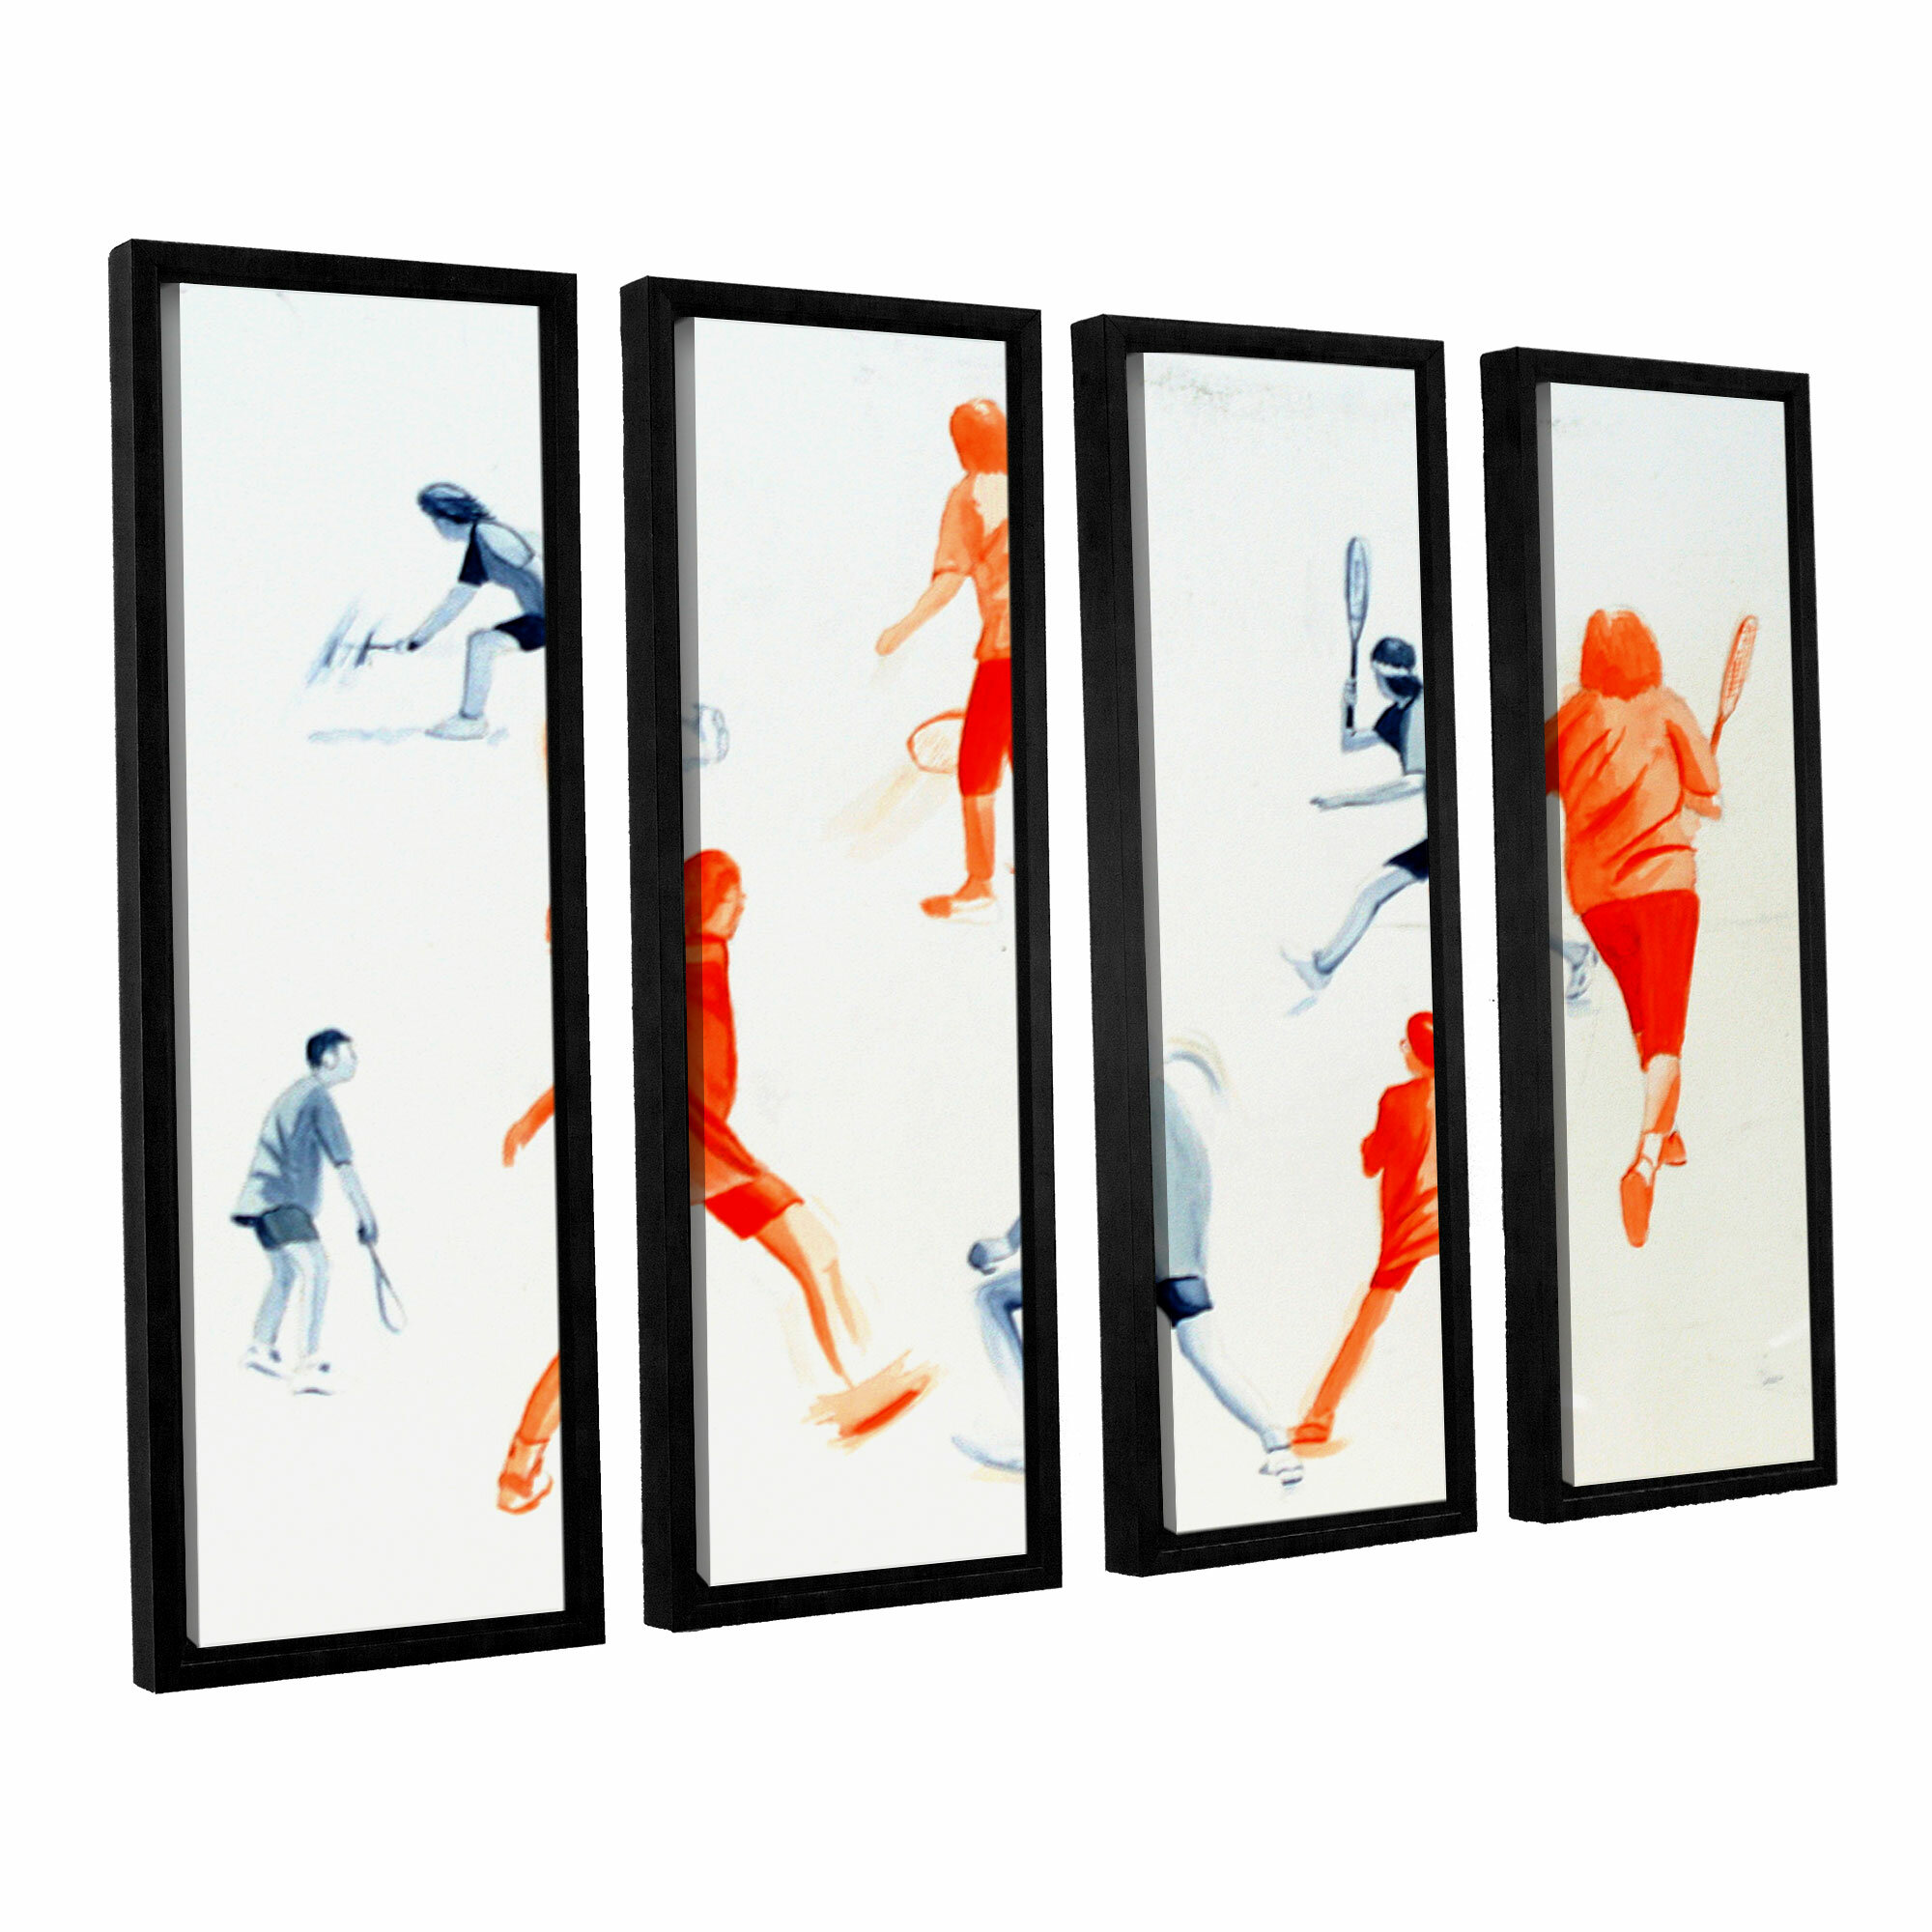 36 by 48 ArtWall Lindsey Janichs Swuahs Players 4 Piece Floater Framed Canvas Set 